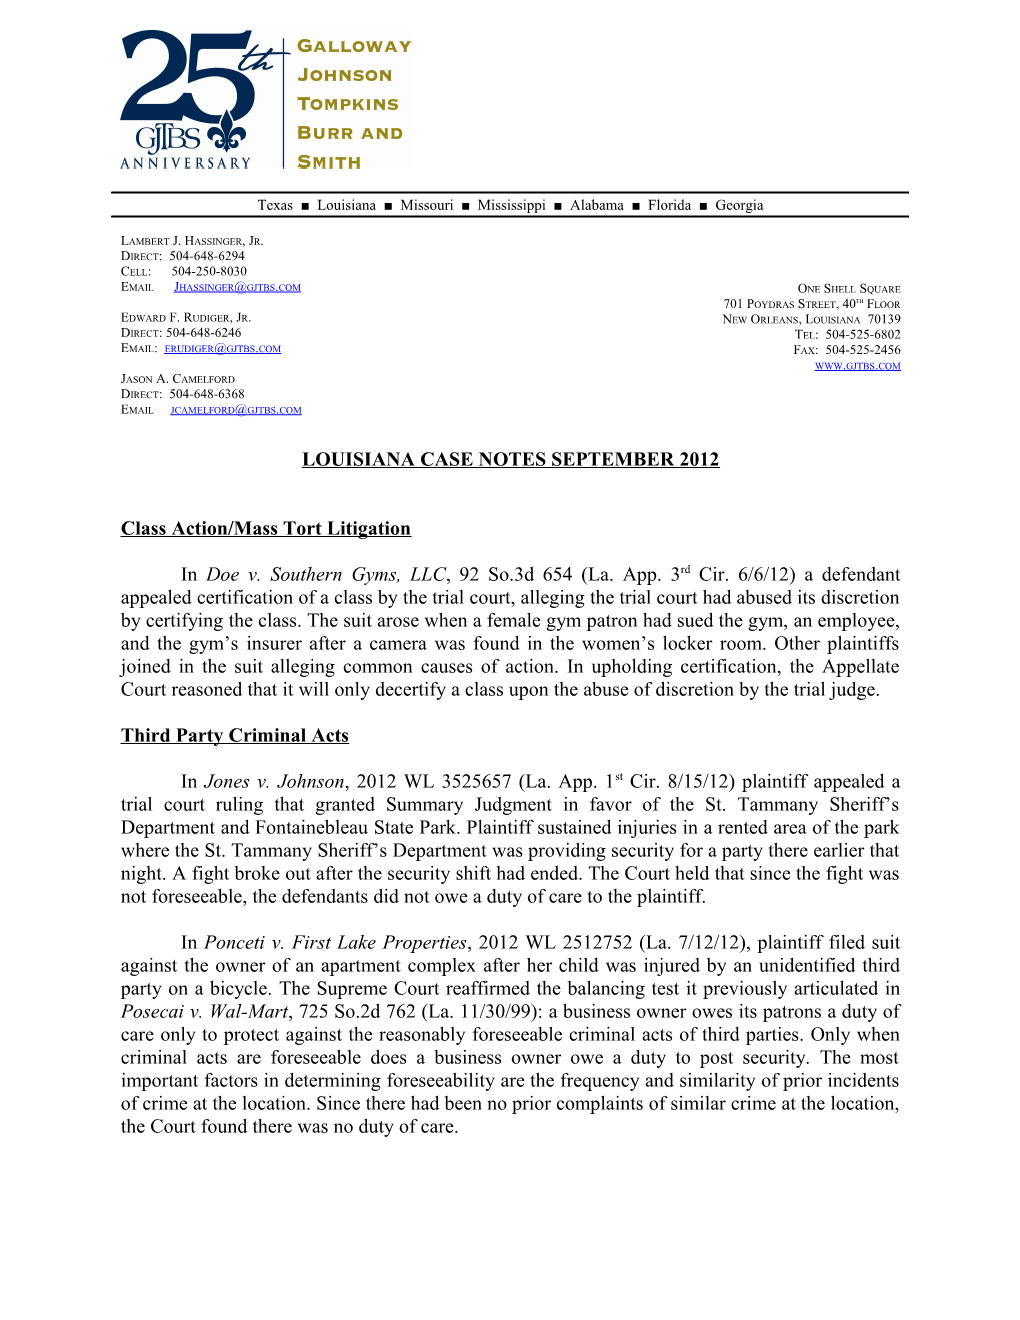 New Case Decisions in Louisiana - October 2012 (02950986)